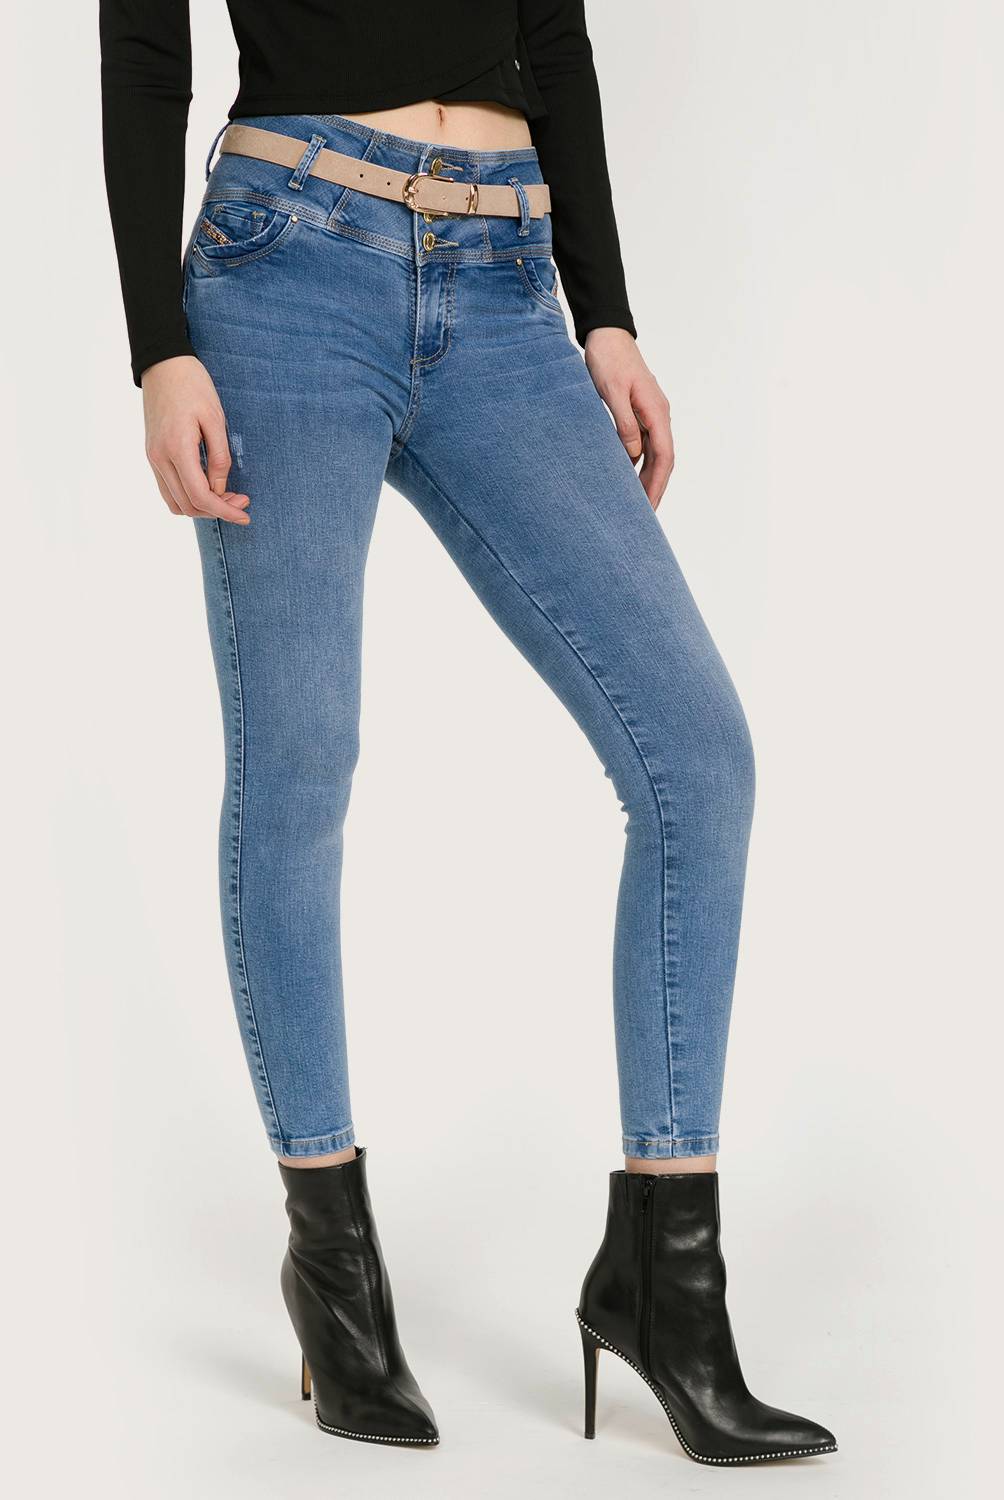 Mossimo - Jeans Mujer